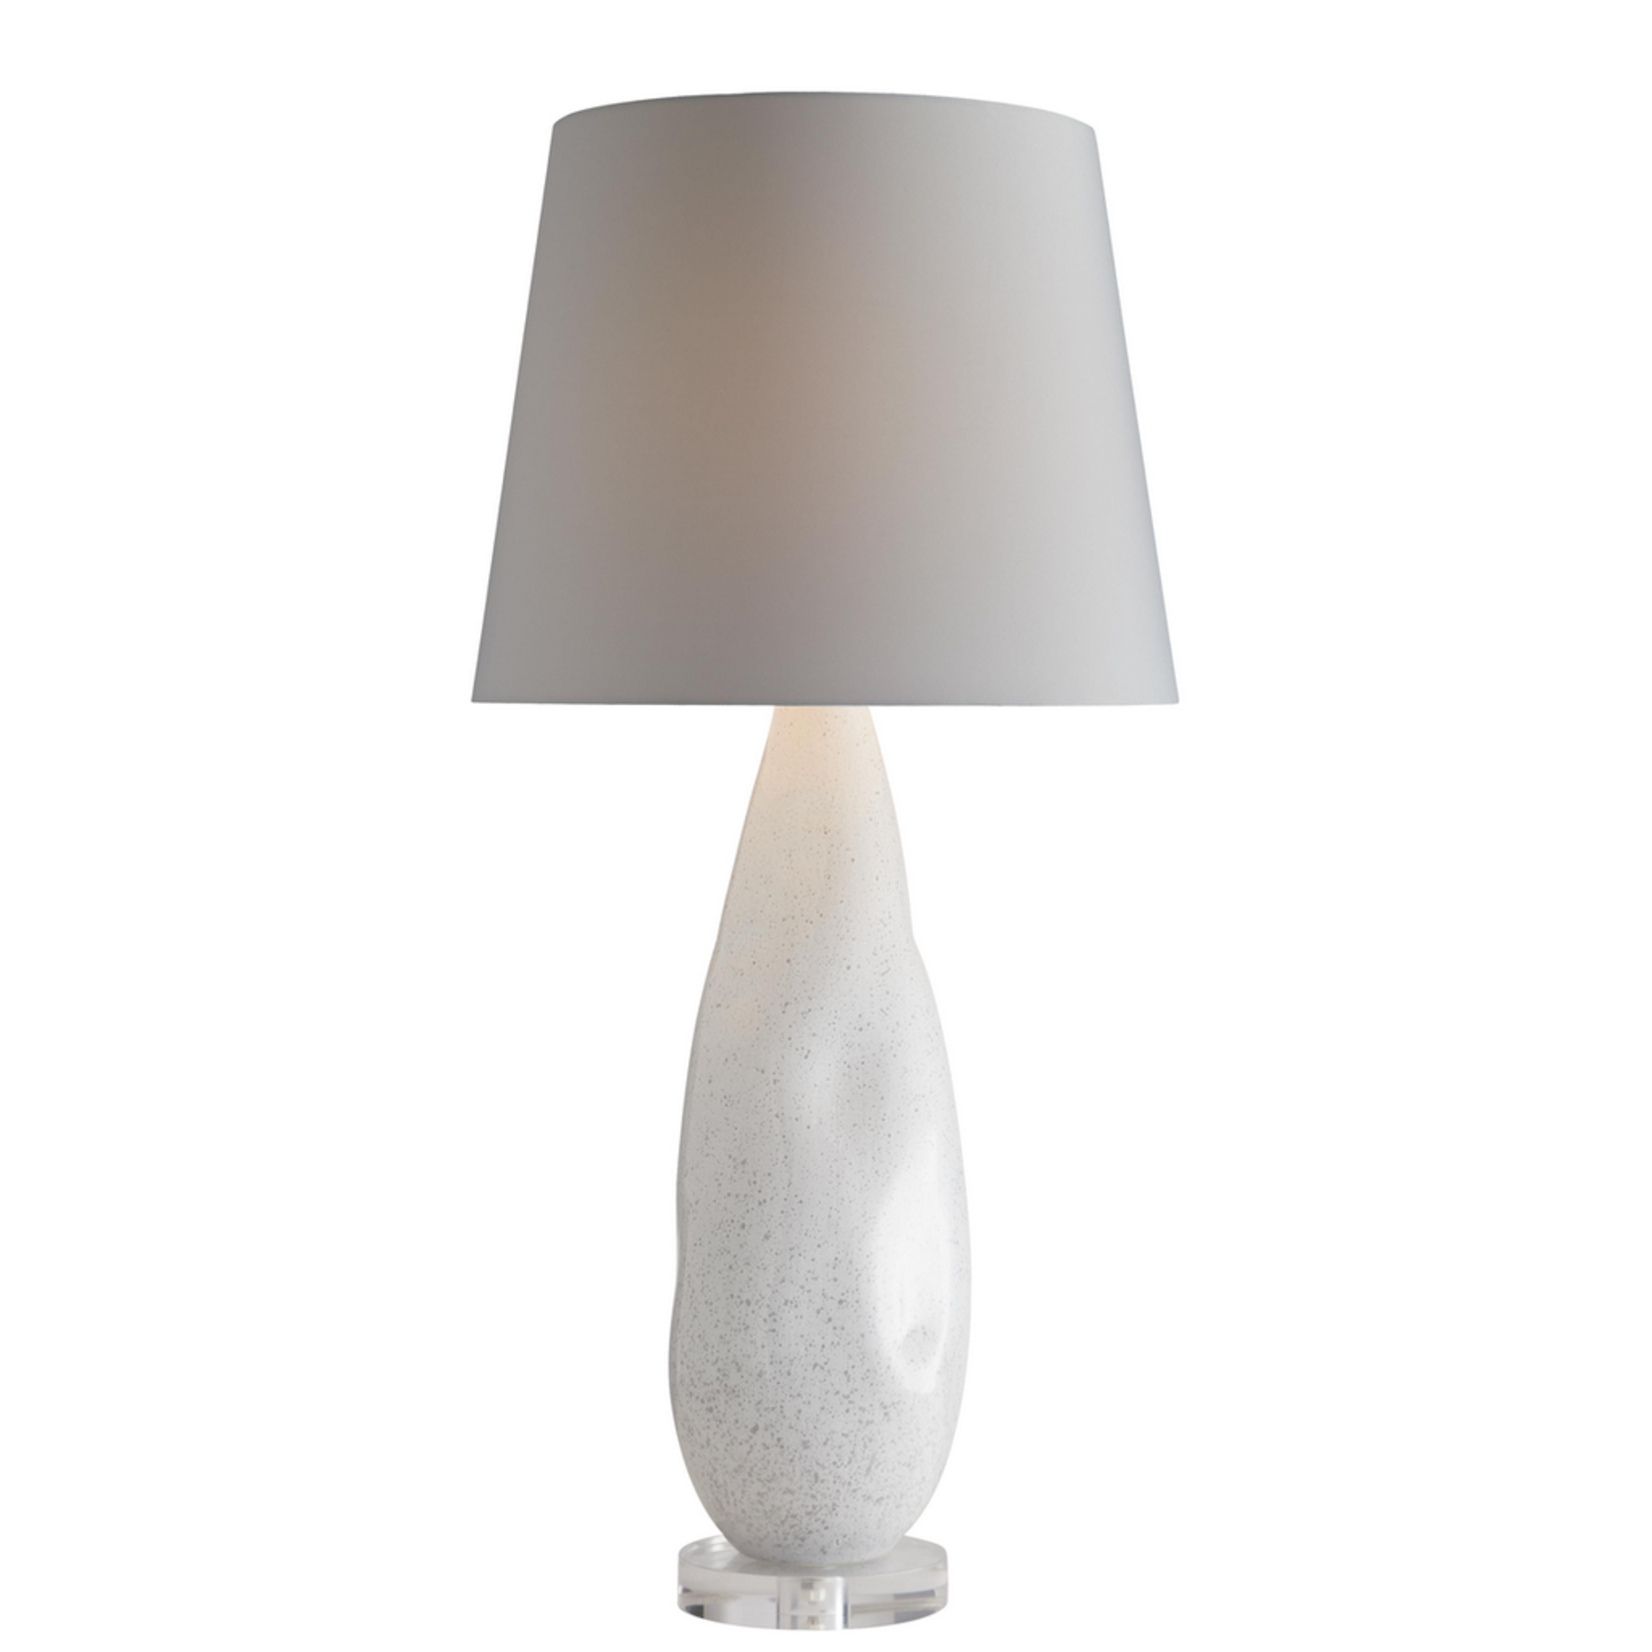 Arteriors Wiley Table Lamp